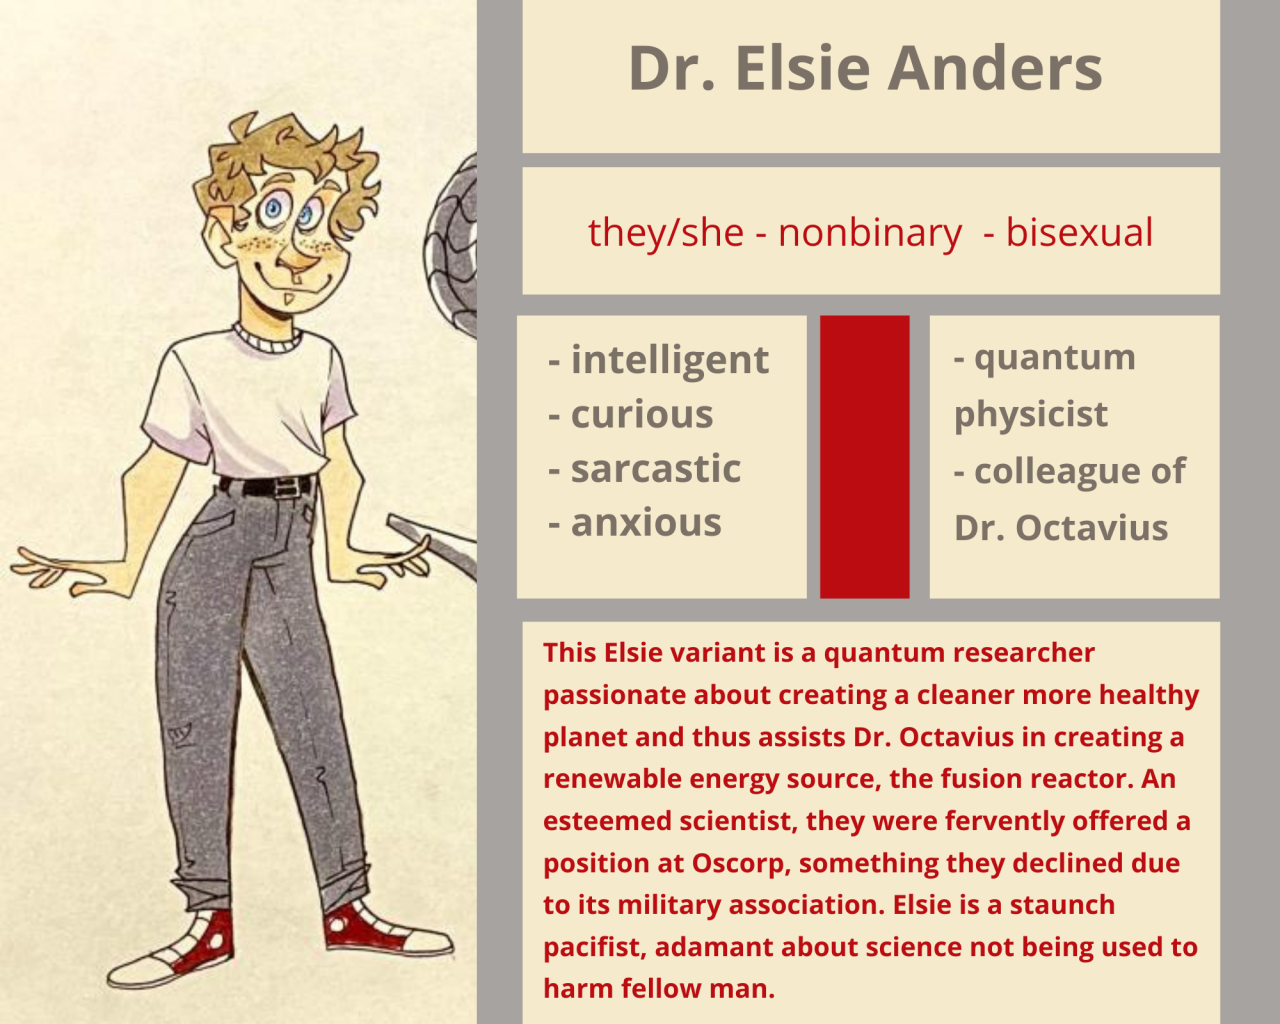 NEW SELF INSERT DROPPED FOR OTTO AND NORMAN!!!!---------------------*in my AU, Rosalie and Otto never get married but remain friendly*---------------------  Graduating university at an early age, Elsie, much like MCU!Elsie, is a prodigy in their own right. They diverge slightly from MCU!Elsie, where instead of astrophysics and cosmology, they pursue quantum physics. This Elsie also has more of a moral compass than her prime counterpart, passionate about the environment and the impact humanity has on its host planet, Earth. They get involved with Dr. Otto Octavius, who is an esteemed nuclear physicist, and avid researcher of sustainable energy alternatives. The two begin to collaborate and eventually, together, develop the Fusion Reactor. During the years leading up to this creation, Norman Osborn offered Elsie a position at his company, Oscorp several times. Despite their repeated denial of the offers, the two grew to be good friends. It was through Elsie that Otto and Norman, who were once college friends, began to reconnect. Elsie begins to develop feelings for both men, doing their damnest at attempting to flirt with each of them. Both Otto and Norman seemed to reciprocate, though it was with Otto that Elsie first confessed. After awhile, Elsie brought up the idea of including Norman, something which Otto initially was opposed to, but after a few outings with which to reconnect with the man, agreed to. Norman and Otto, both now dating Elsie, did not start out having romantic feelings for each other, but slowly they too fell in love with each other. (Time passes and Parker and Strange do a magical fucky wucky and NWH happens-)At some point in time during Spiderman NWH, Peter Parker + MJ and Ned find and bring back Elsie. Elsie, being essentially harmless, is a little offended to be locked up at first. Once the three are let out of their cells, they embrace, overjoyed to see each other again, especially in this strange new universe. The rest of the movie basically proceeds as canon with the addition of Elsie in their ofc lol #we could be the best kind of friends~  #